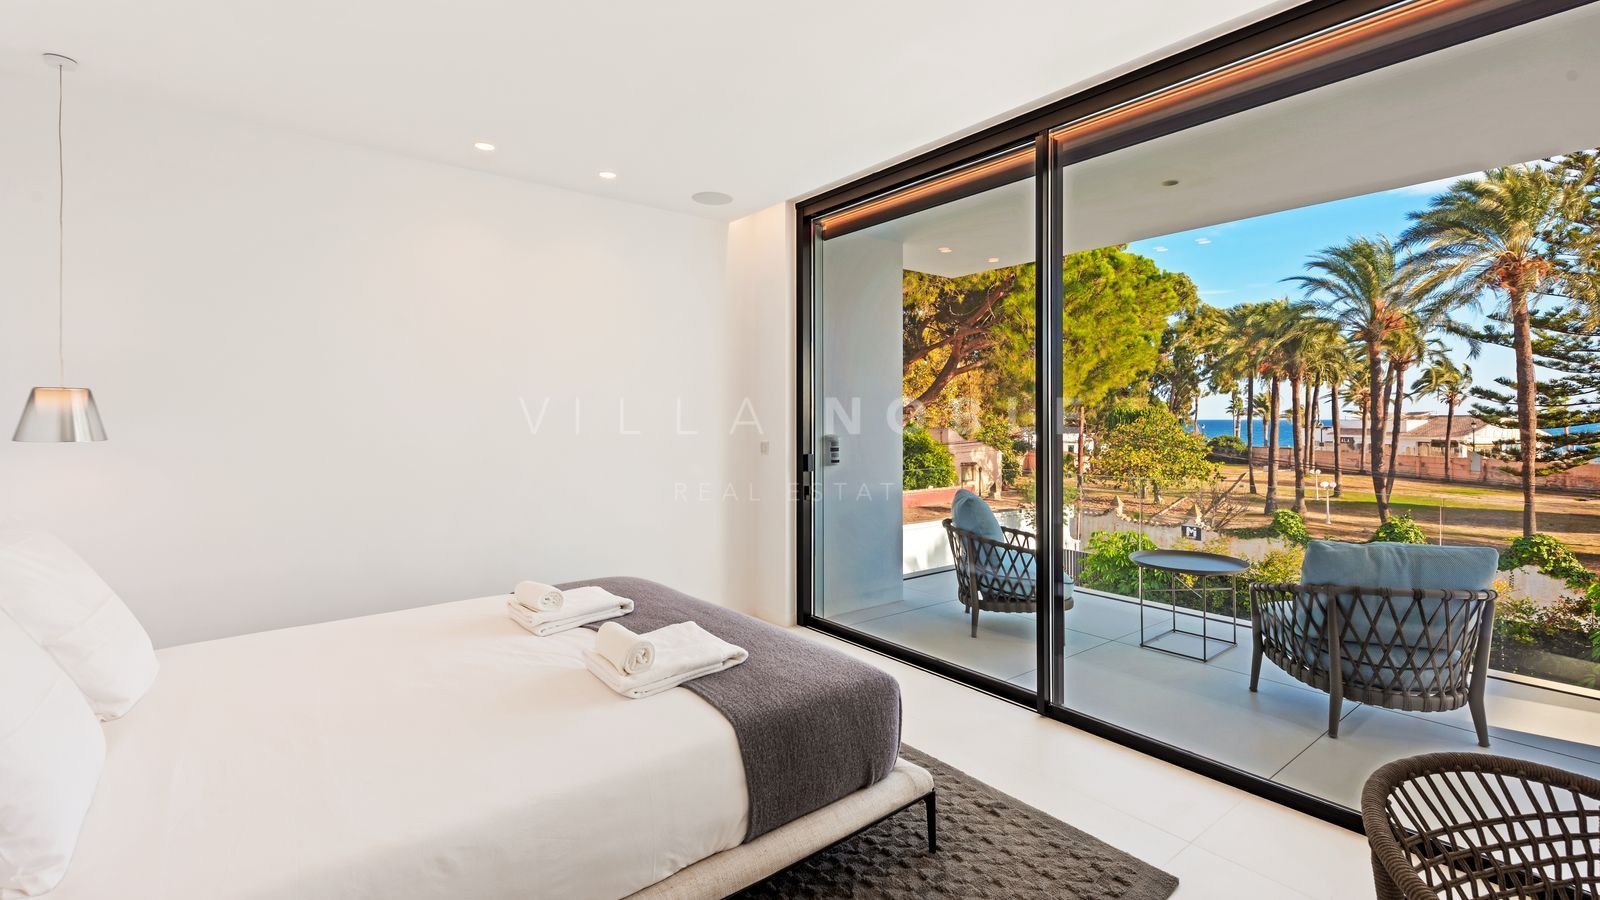 Brand new villa with elegant and modern design just a few steps from the beach!